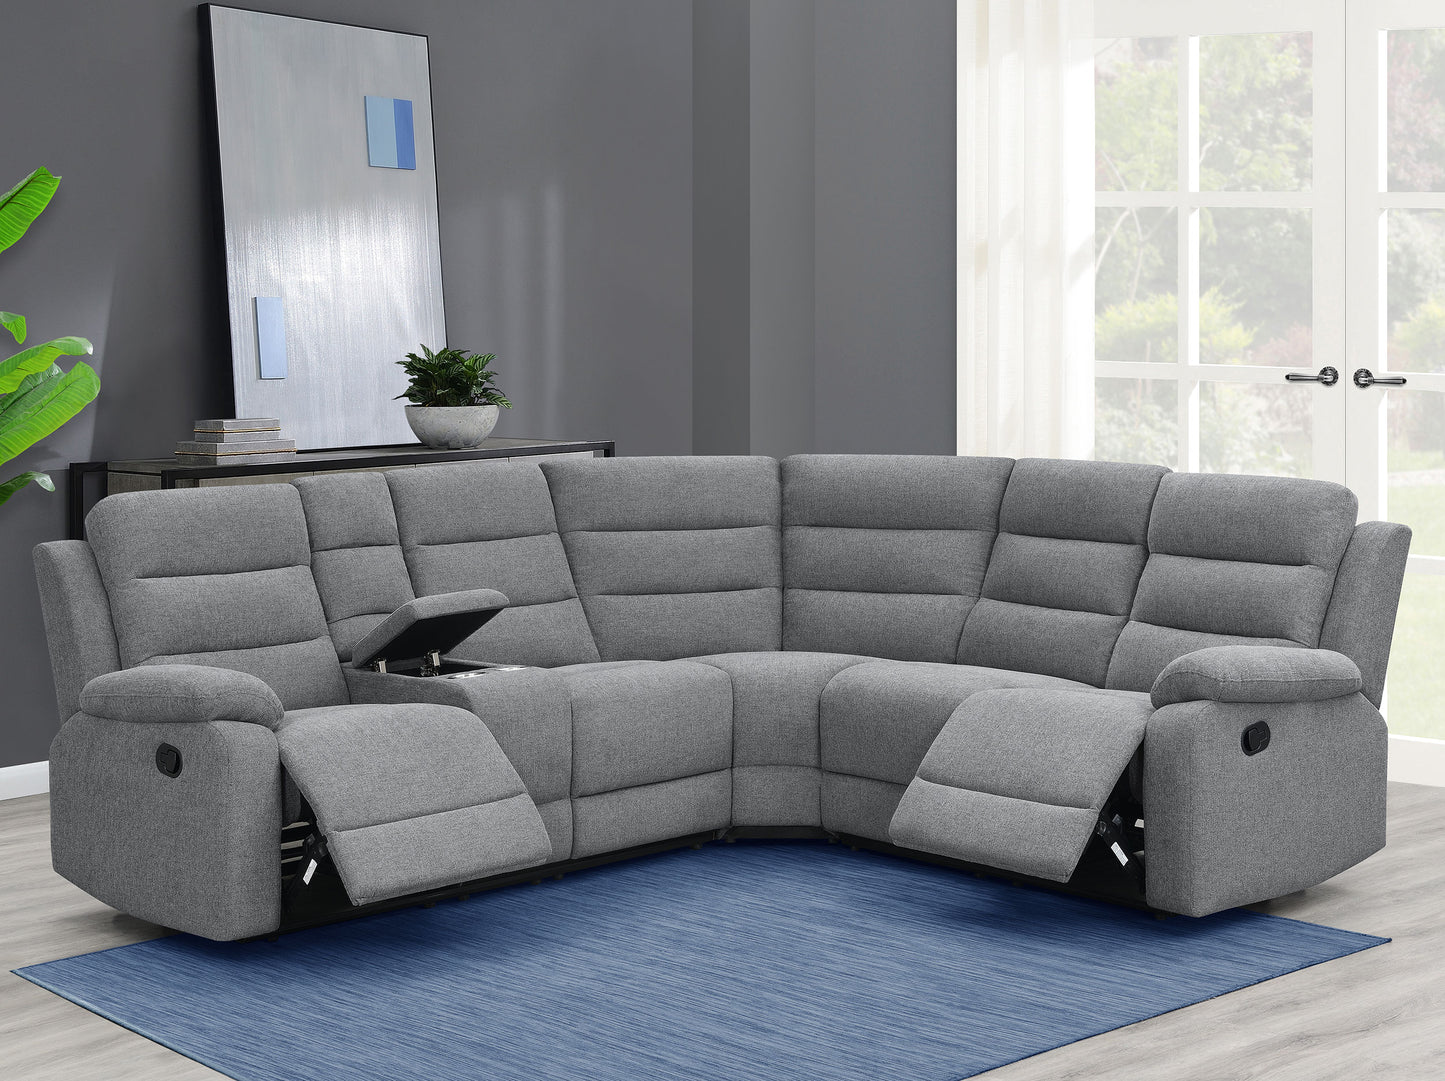 3 pc motion sectional